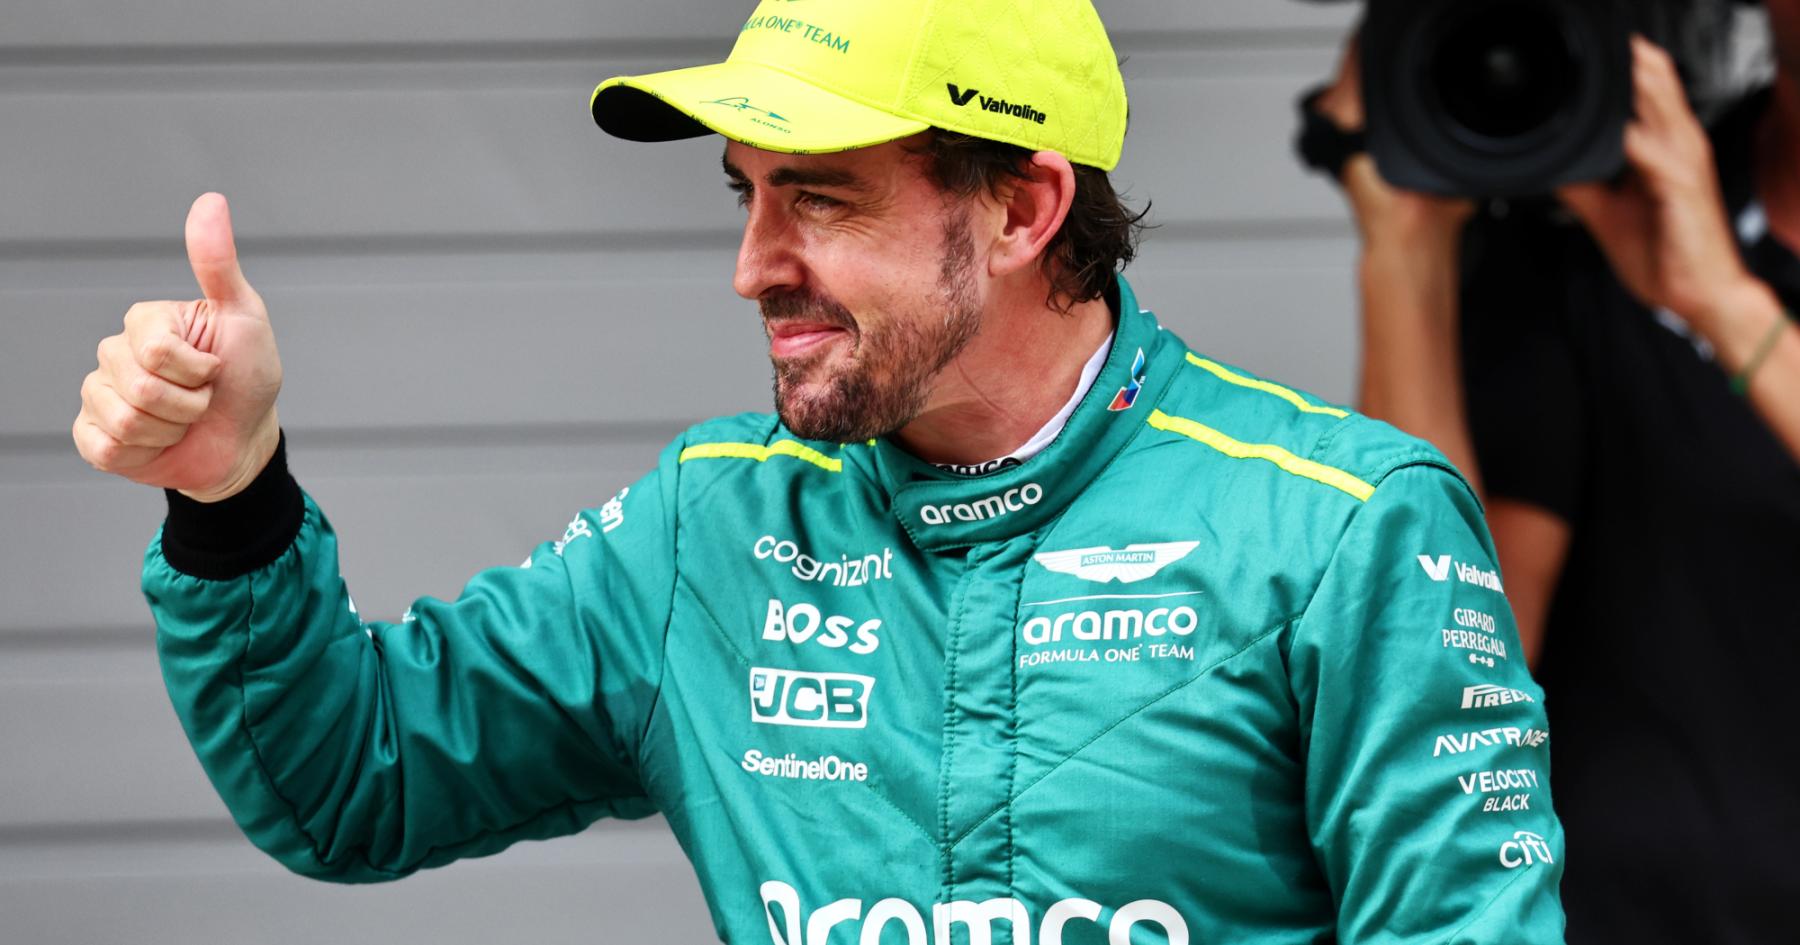 Alonso's Qualifying Setback: A Missed Chance to Challenge Red Bull's Dominance